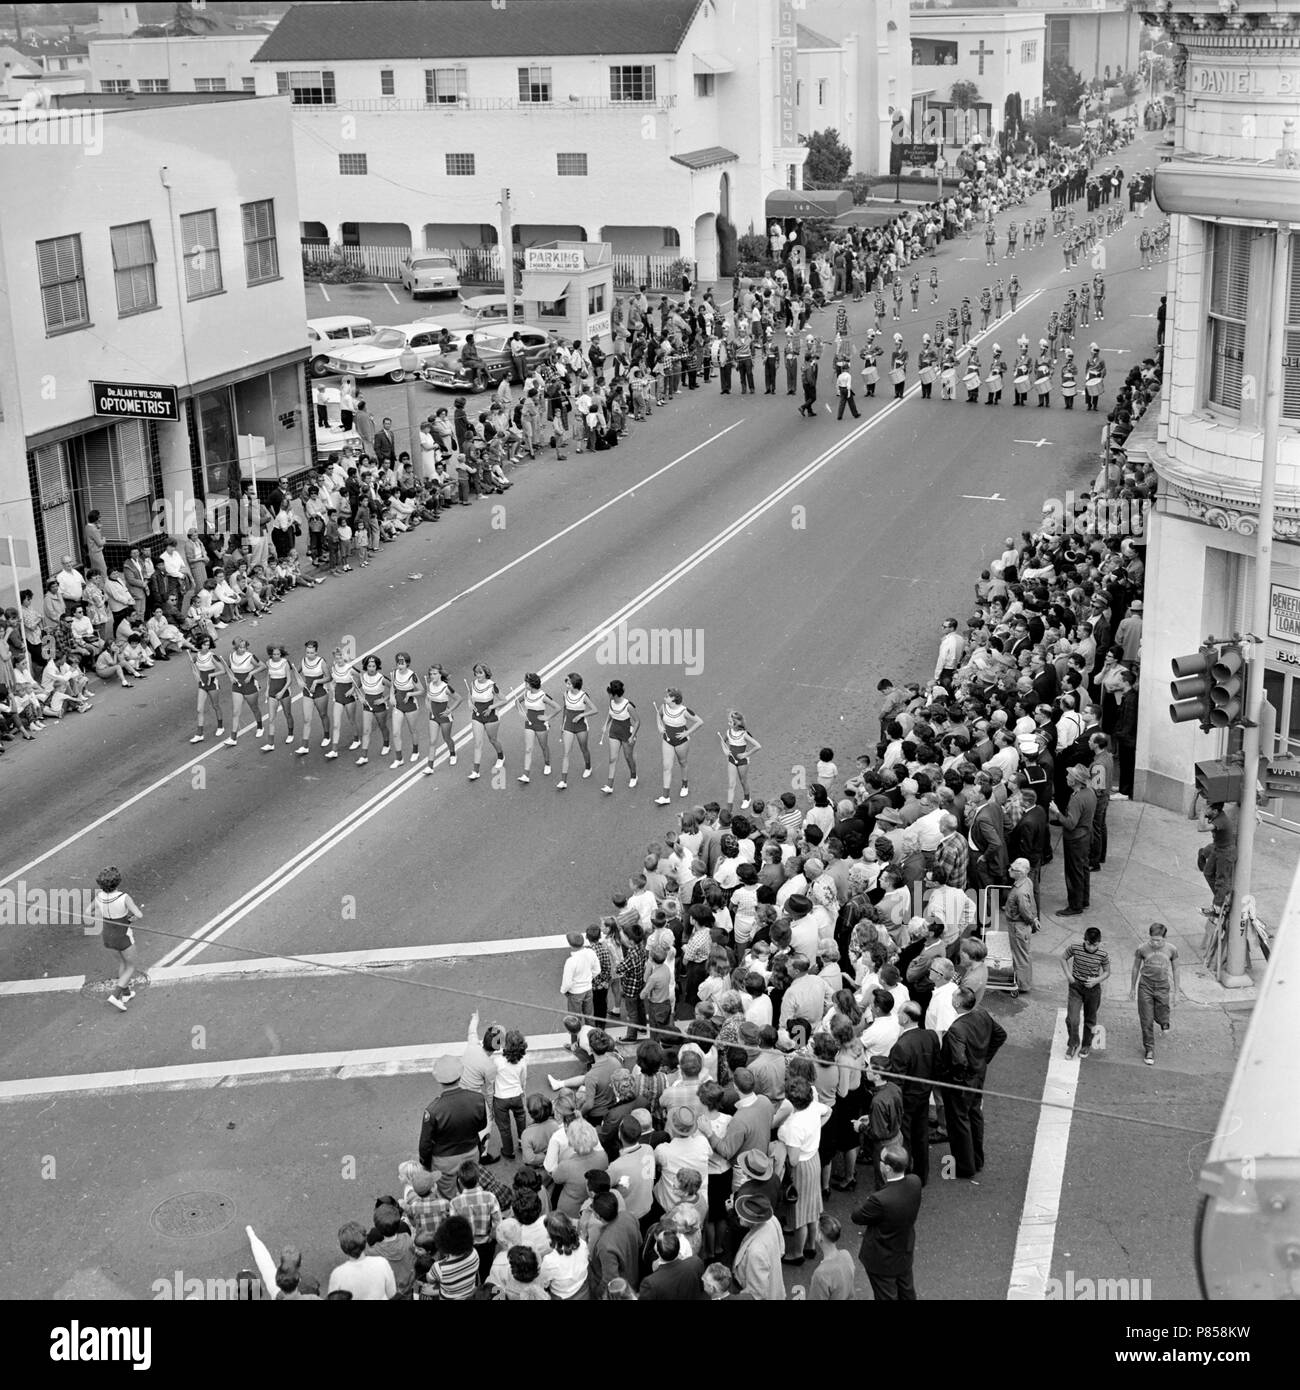 The citizens of San Leandro, California crowd the main street to watch a community parade, ca. 1964. Stock Photo